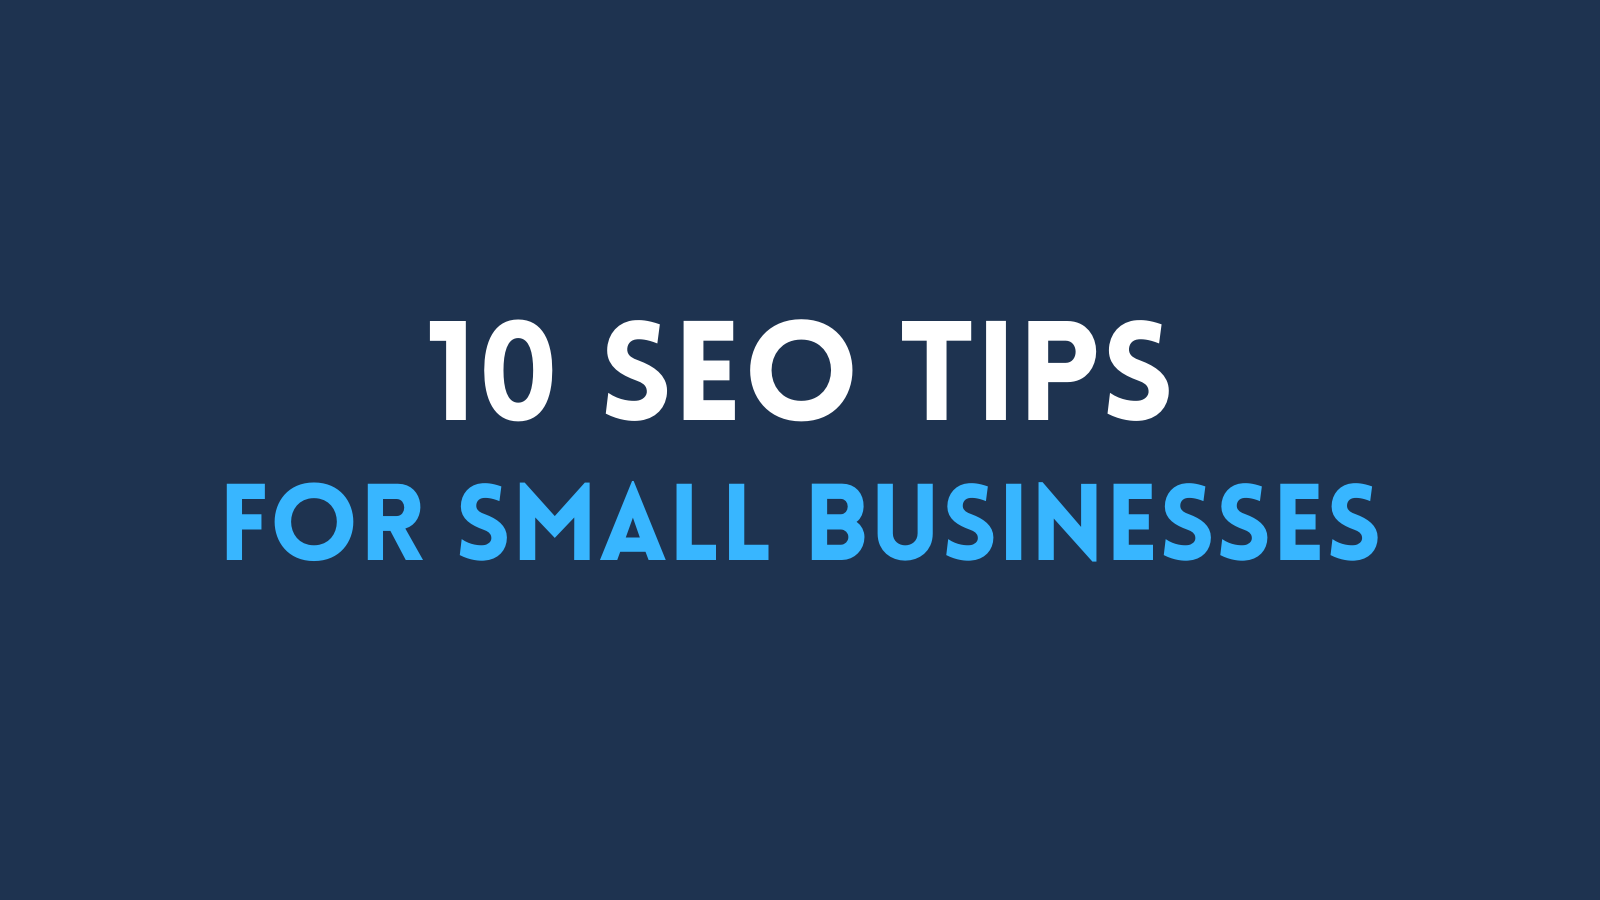 10 SEO tips for small businesses